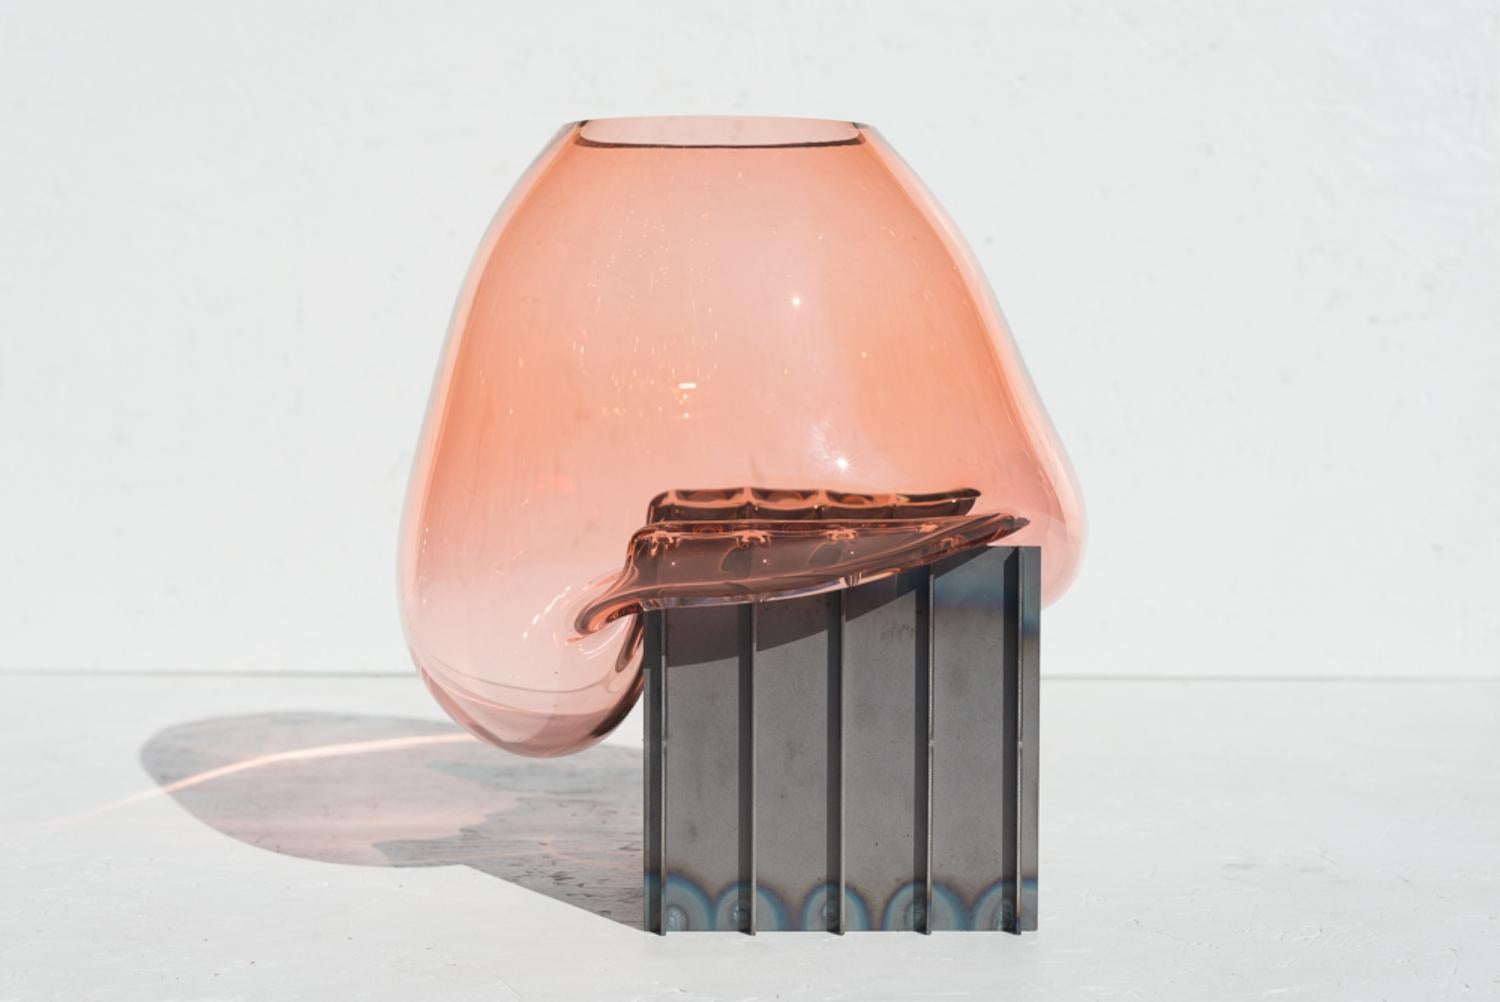 Pink grid table vase by Studio Thier & van Daalen
Dimensions: W 30 x D 35 x H 35cm
Materials: Steel, Glass

The studio was keen to find a way to display the fluidity of glass. Therefore they sought the contrast between the industrial steel and